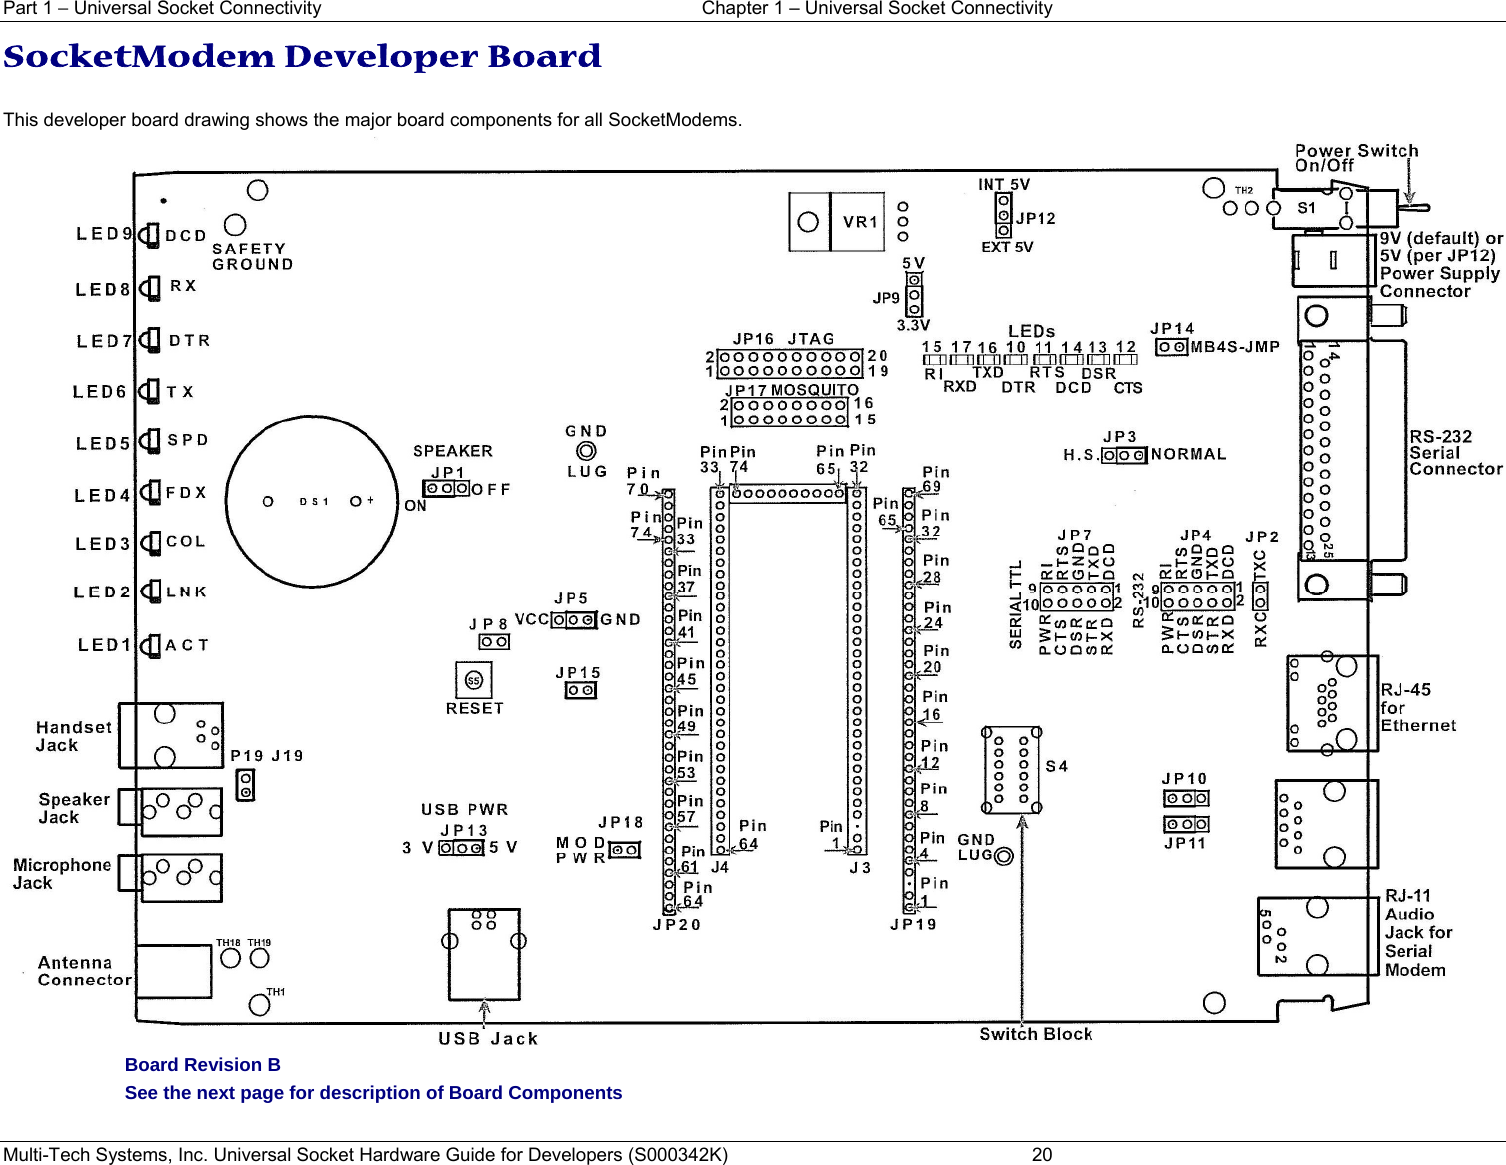 Part 1 − Universal Socket Connectivity    Chapter 1 – Universal Socket Connectivity Multi-Tech Systems, Inc. Universal Socket Hardware Guide for Developers (S000342K)  20 SocketModem Developer Board   This developer board drawing shows the major board components for all SocketModems.   Board Revision B See the next page for description of Board Components 